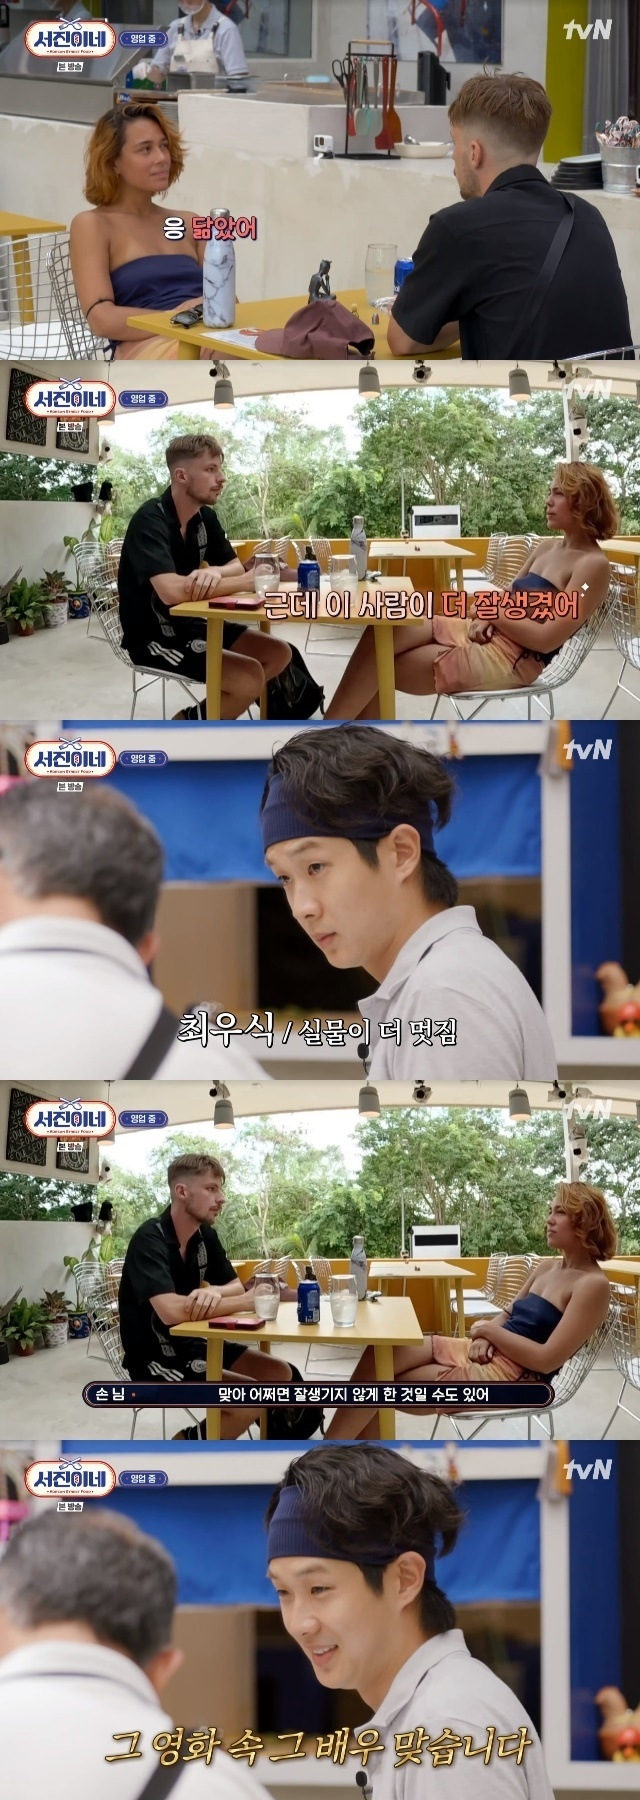 A guest who watched Choi Woo-shik unintentionally praised his Bigger Than LifeTVN entertainment broadcasted on March 24 Seo-jin! In the 5th session, a guest who recognized Choi Woo-shik also appeared.One male guest glanced at Choi Woo-shik, who received the magic word, and said, That young man looks like the actor there. We saw him in Mexico City. The female guest said, Yes, he looks like him.But its not really him, Choi Woo-shik said.